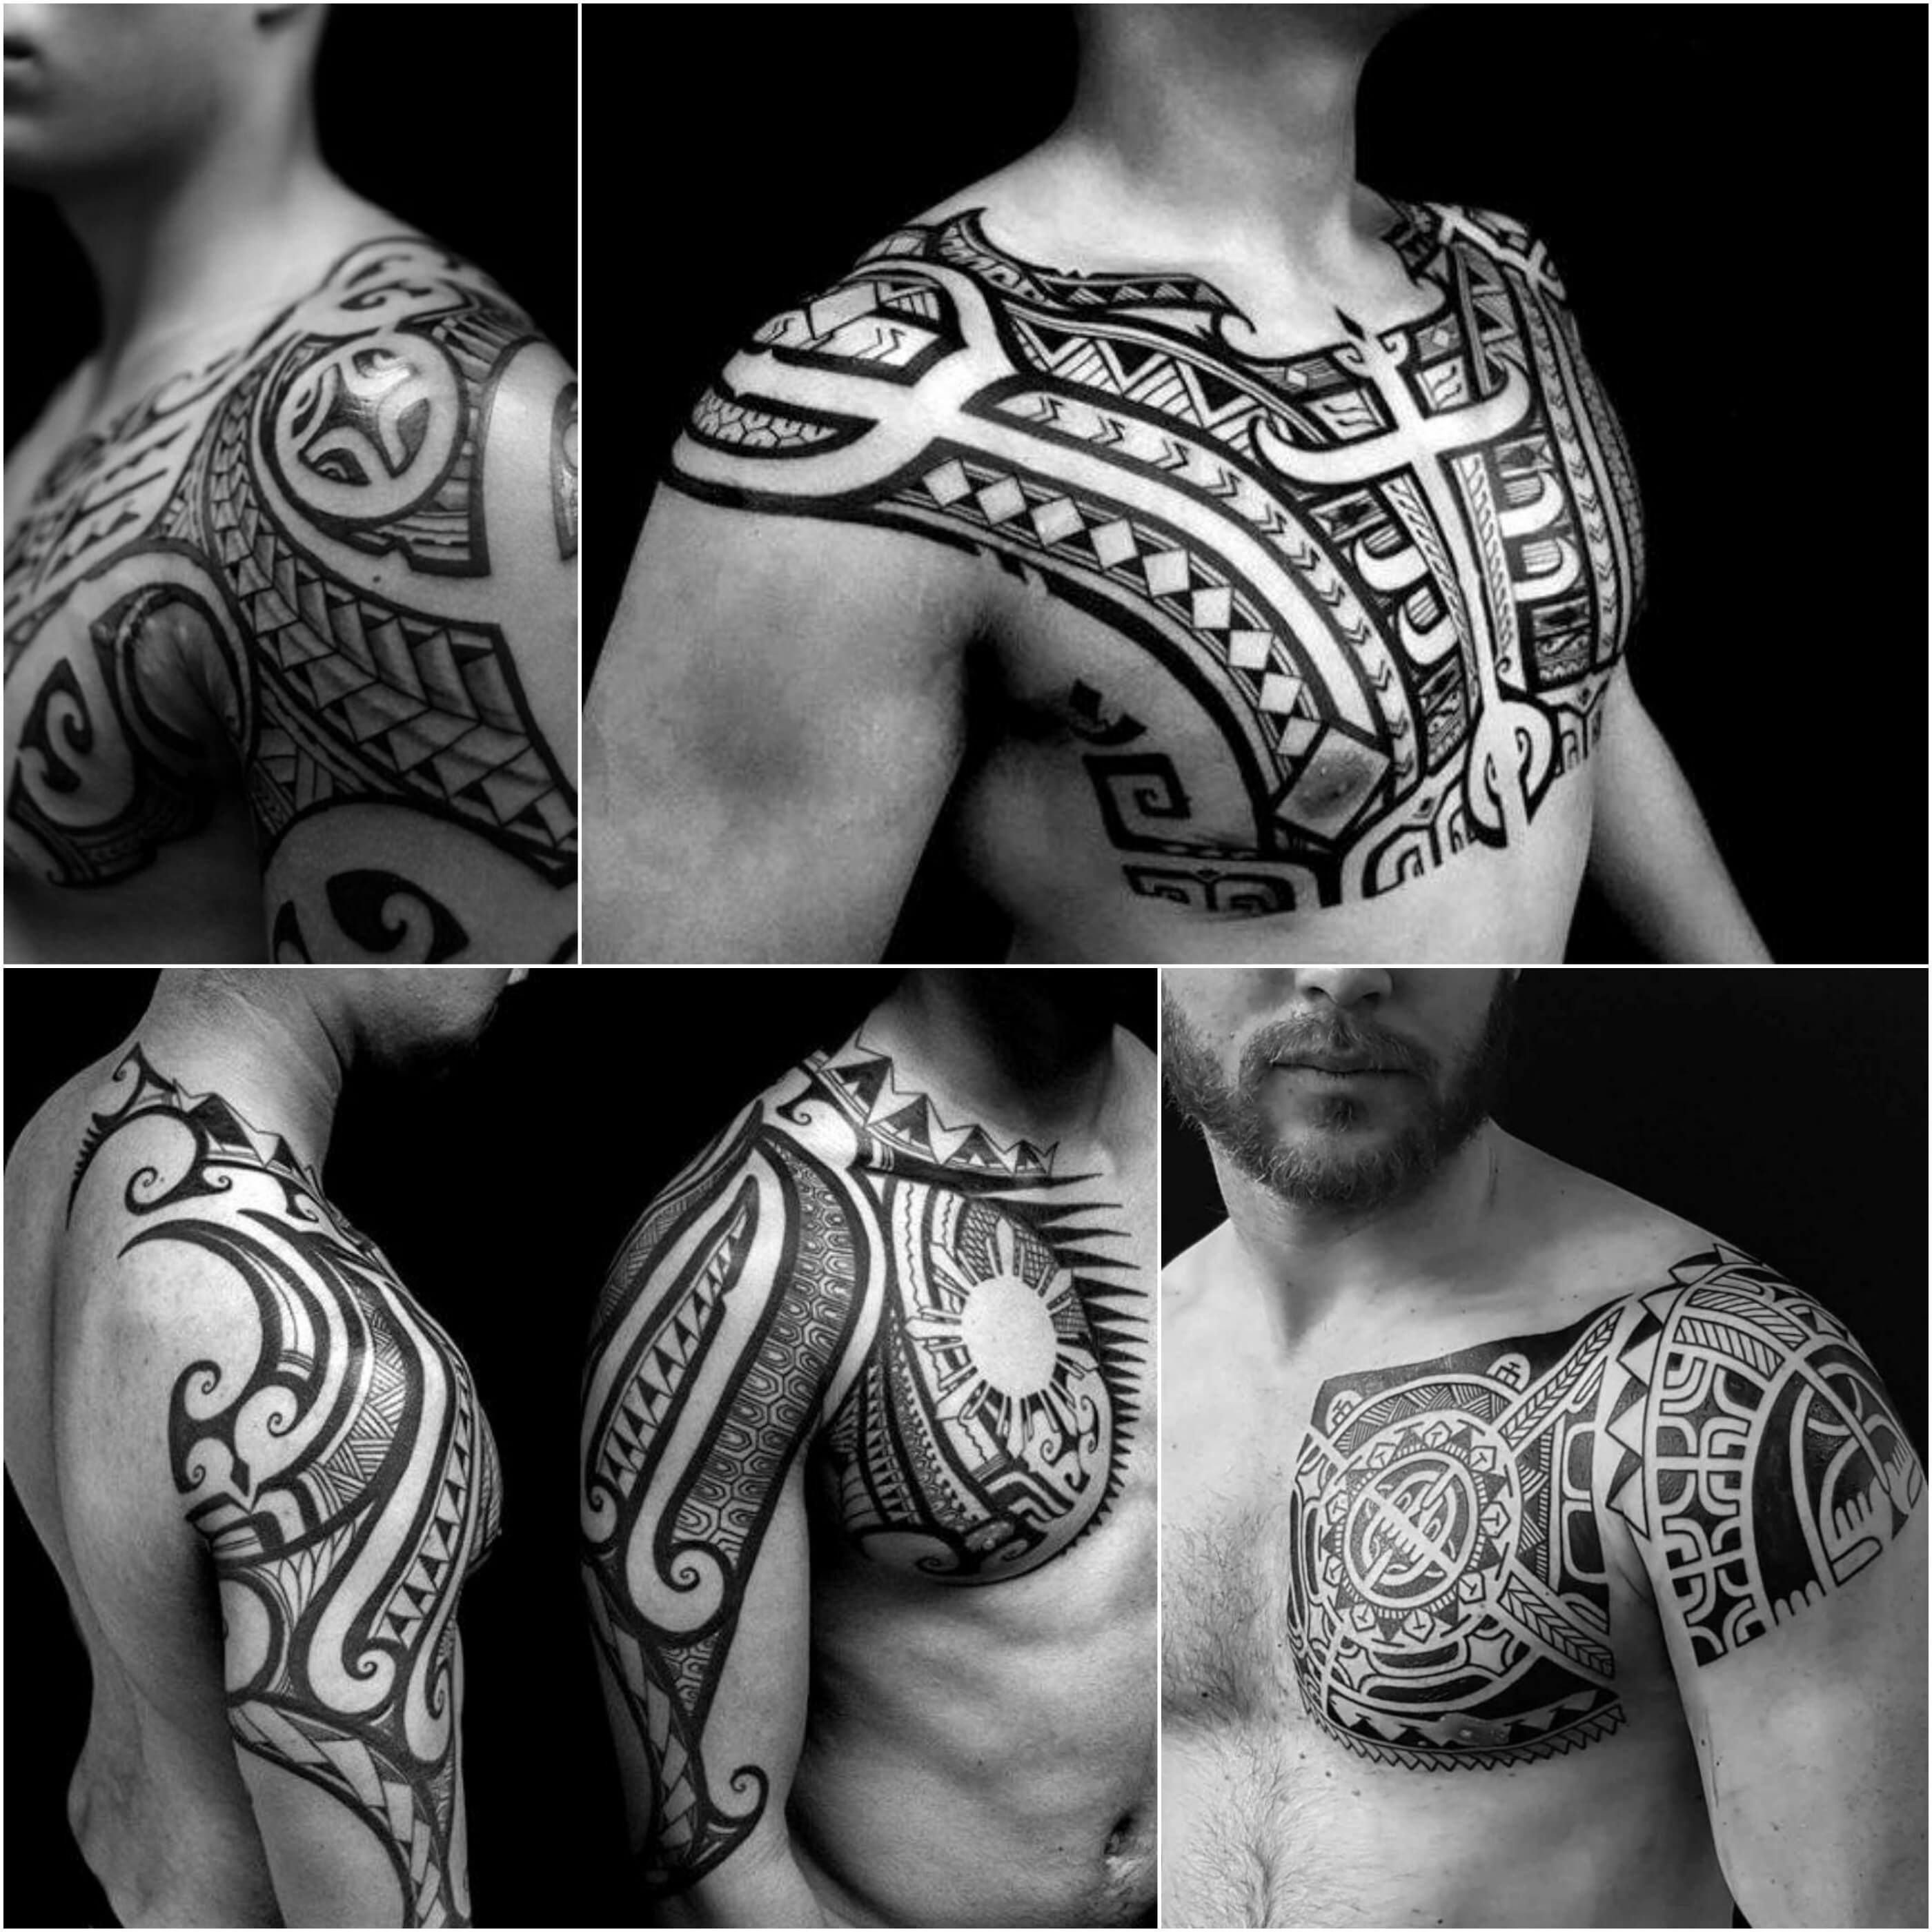 100 Best Chest Tattoos For Men Chest Tattoo Gallery For Men throughout sizing 2800 X 2800